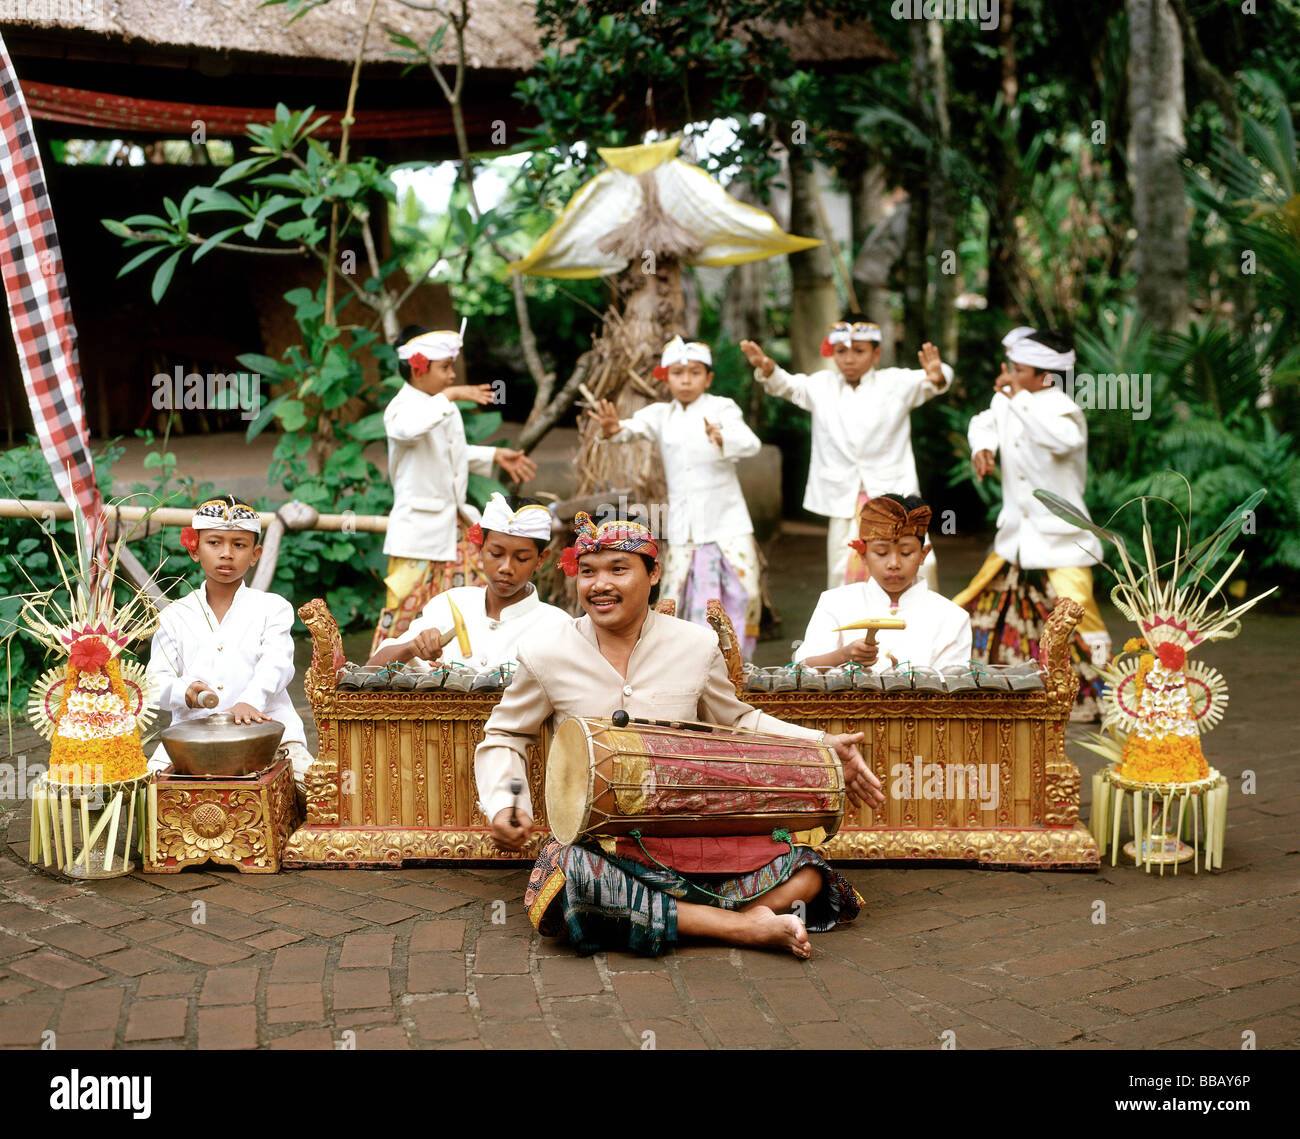 Indonesia, Bali, man playing hand drum, young boys in traditional costume dancing Stock Photo